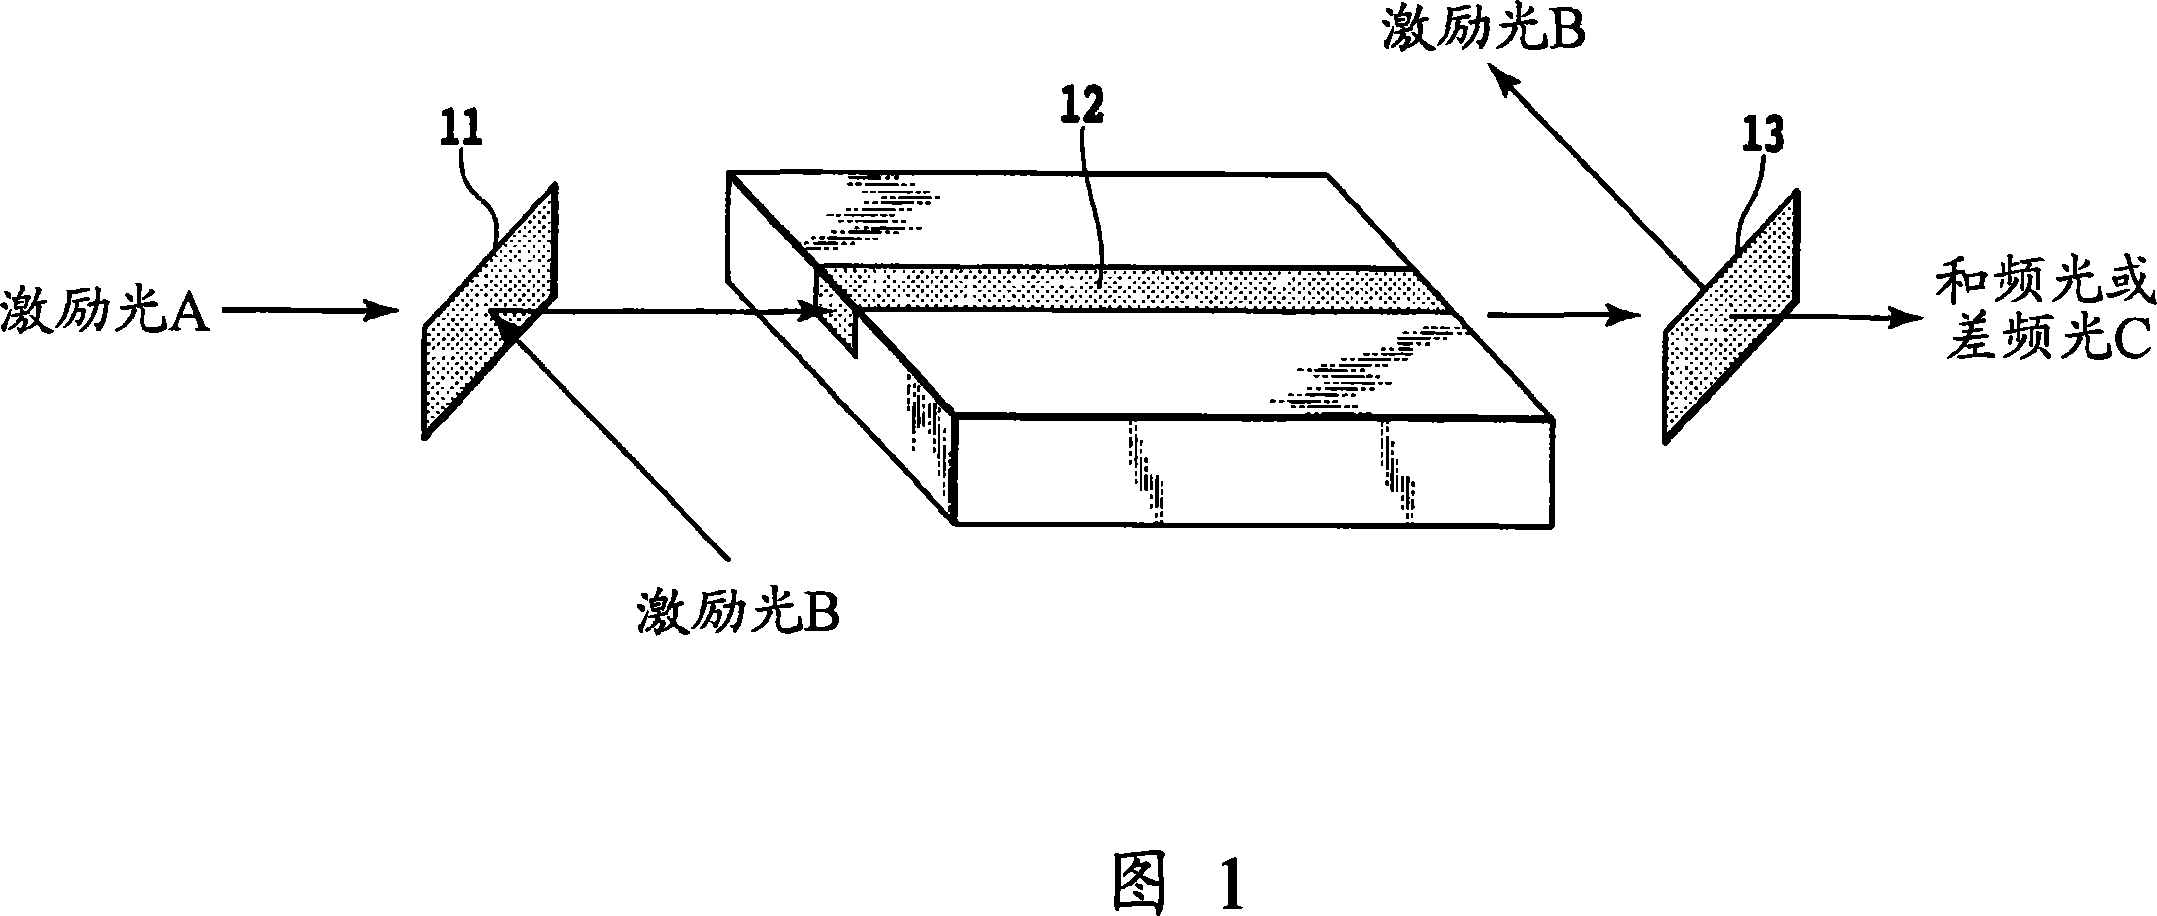 Method for manufacturing a periodically-poled structure